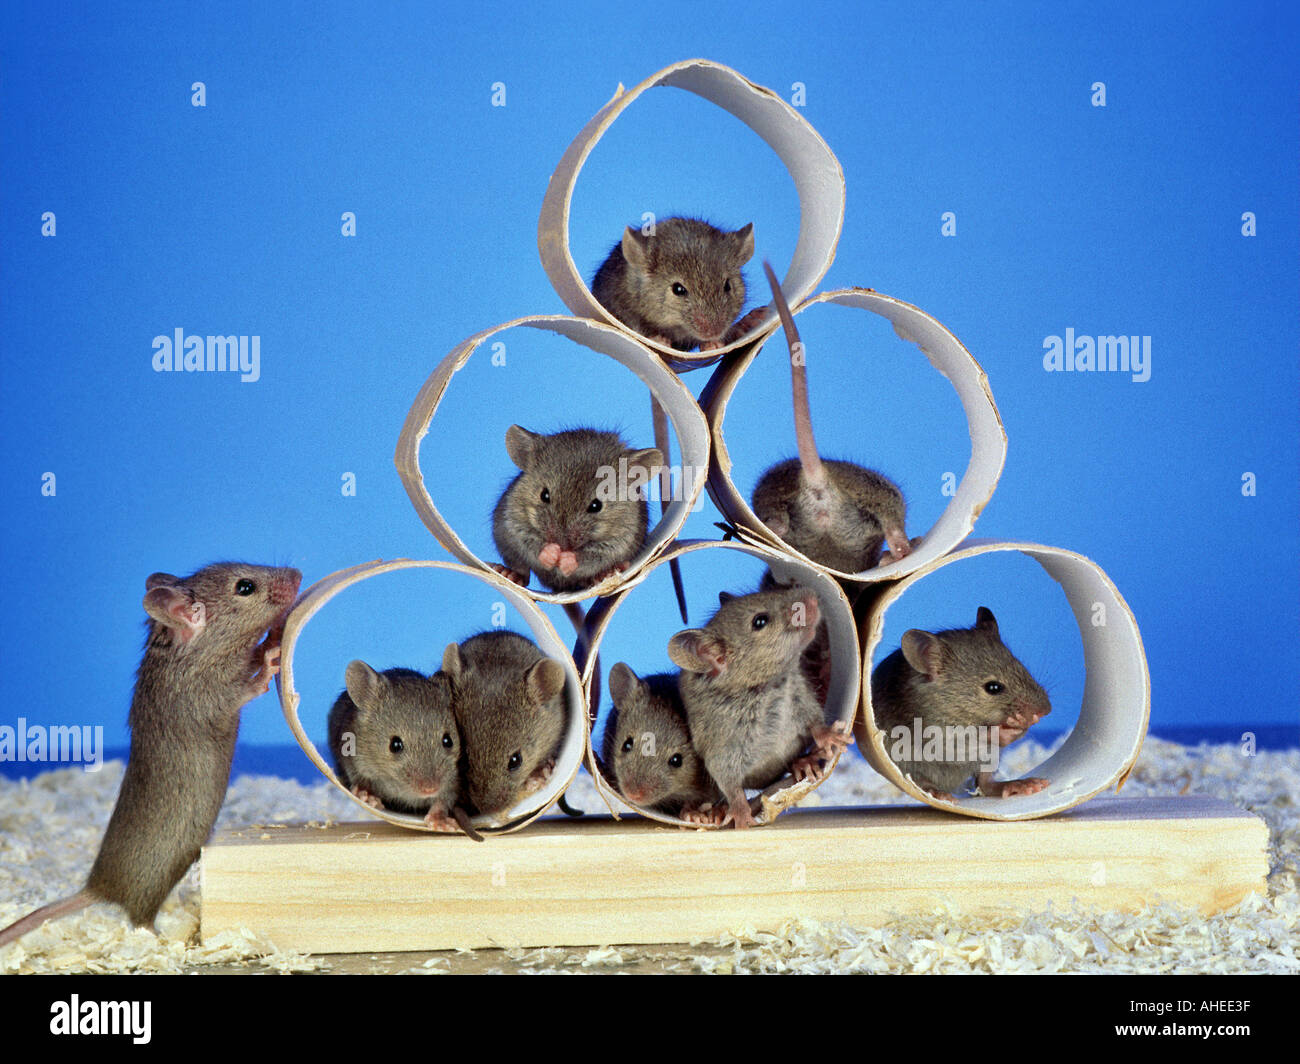 9 nine mice sitting in a PYRAMID made of paper rolls  Stock Photo